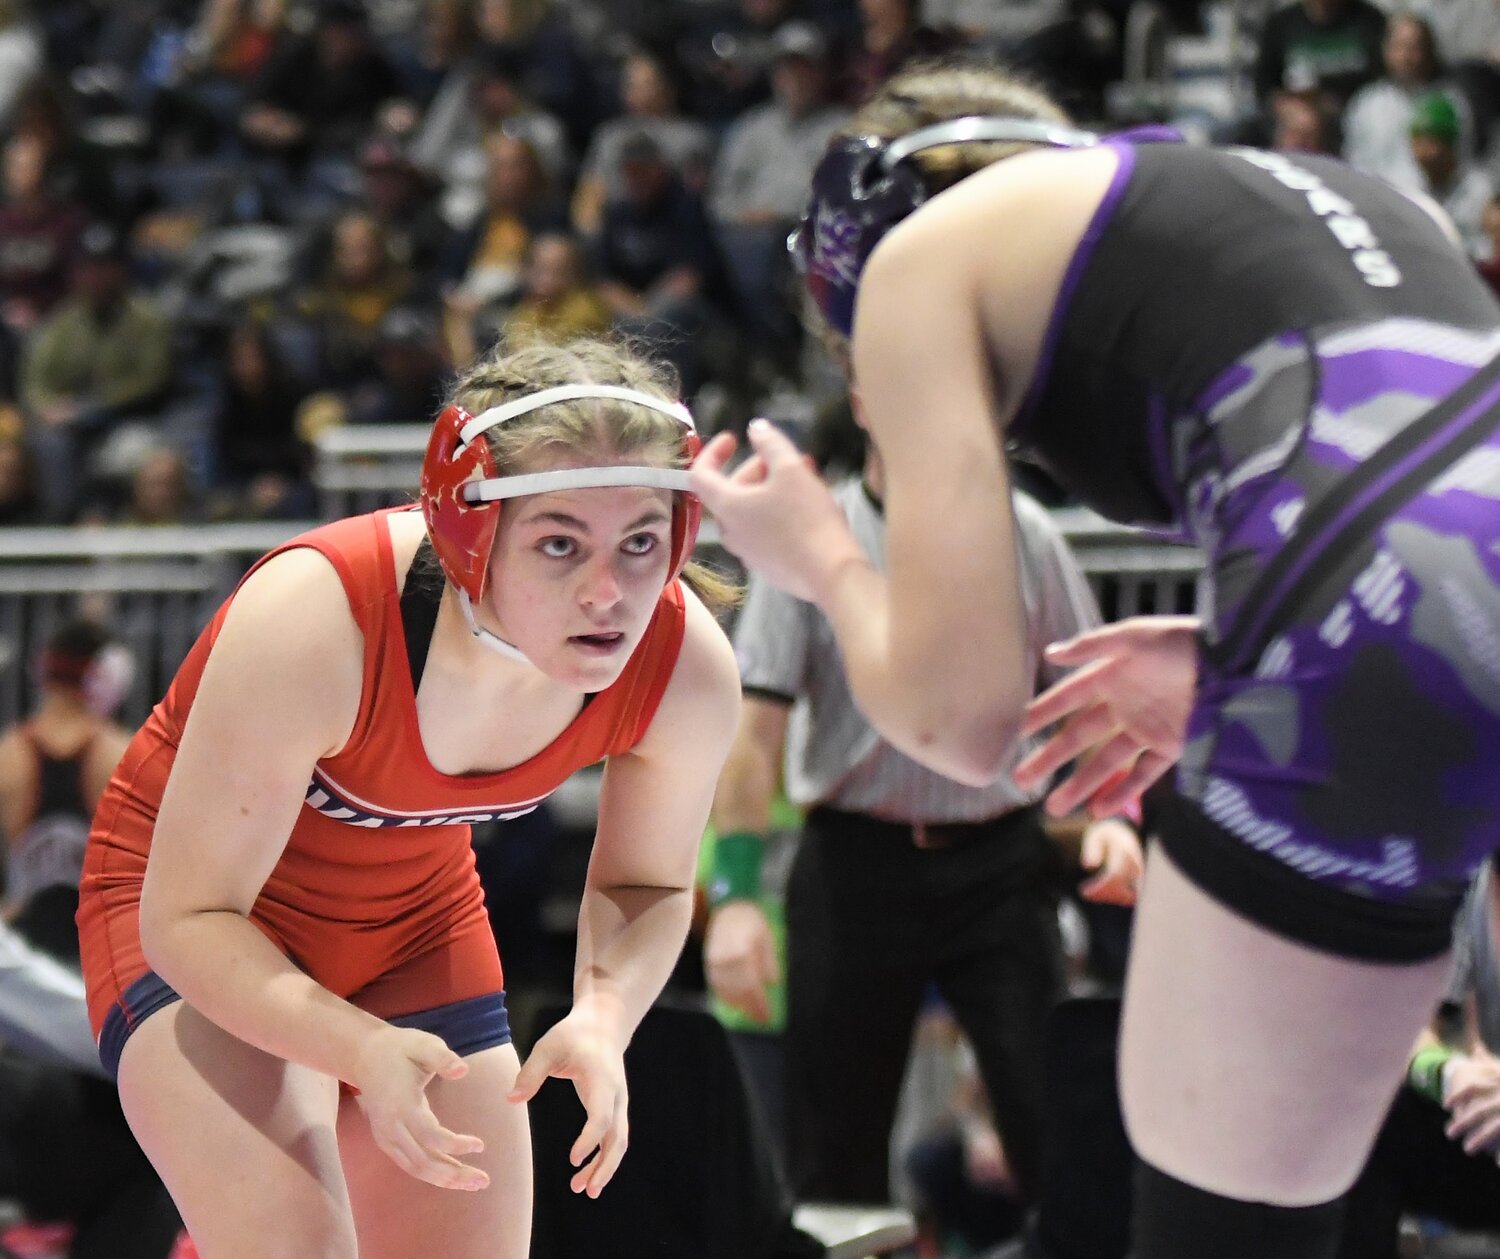 Lady Devil Sidney Liechty finished sixth in the 105-pound class at the WHSAA Girls State Wrestling Championships in Casper.